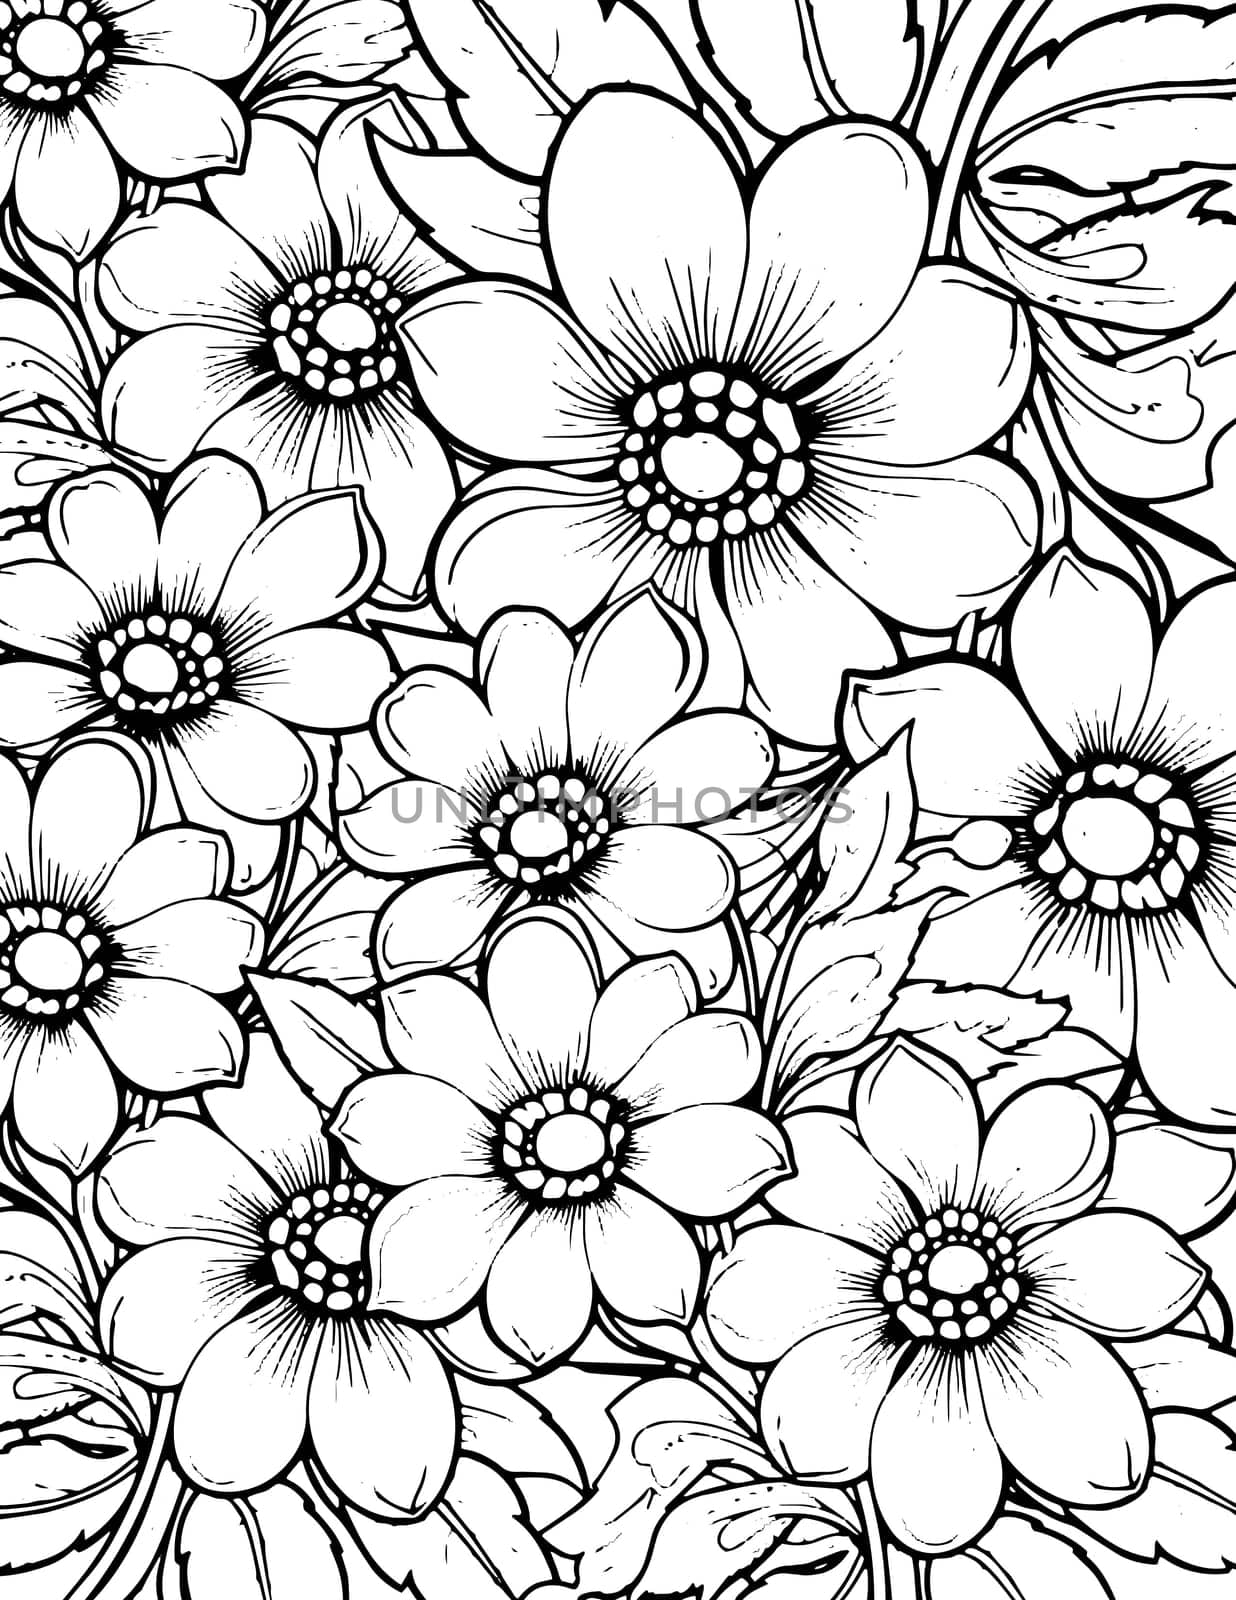 Flower Kids and Adult Coloring page spring and summer doodle elements. Mandala pattern with floral elements on white background design for flower mandala coloring book. by Skyecreativestudio